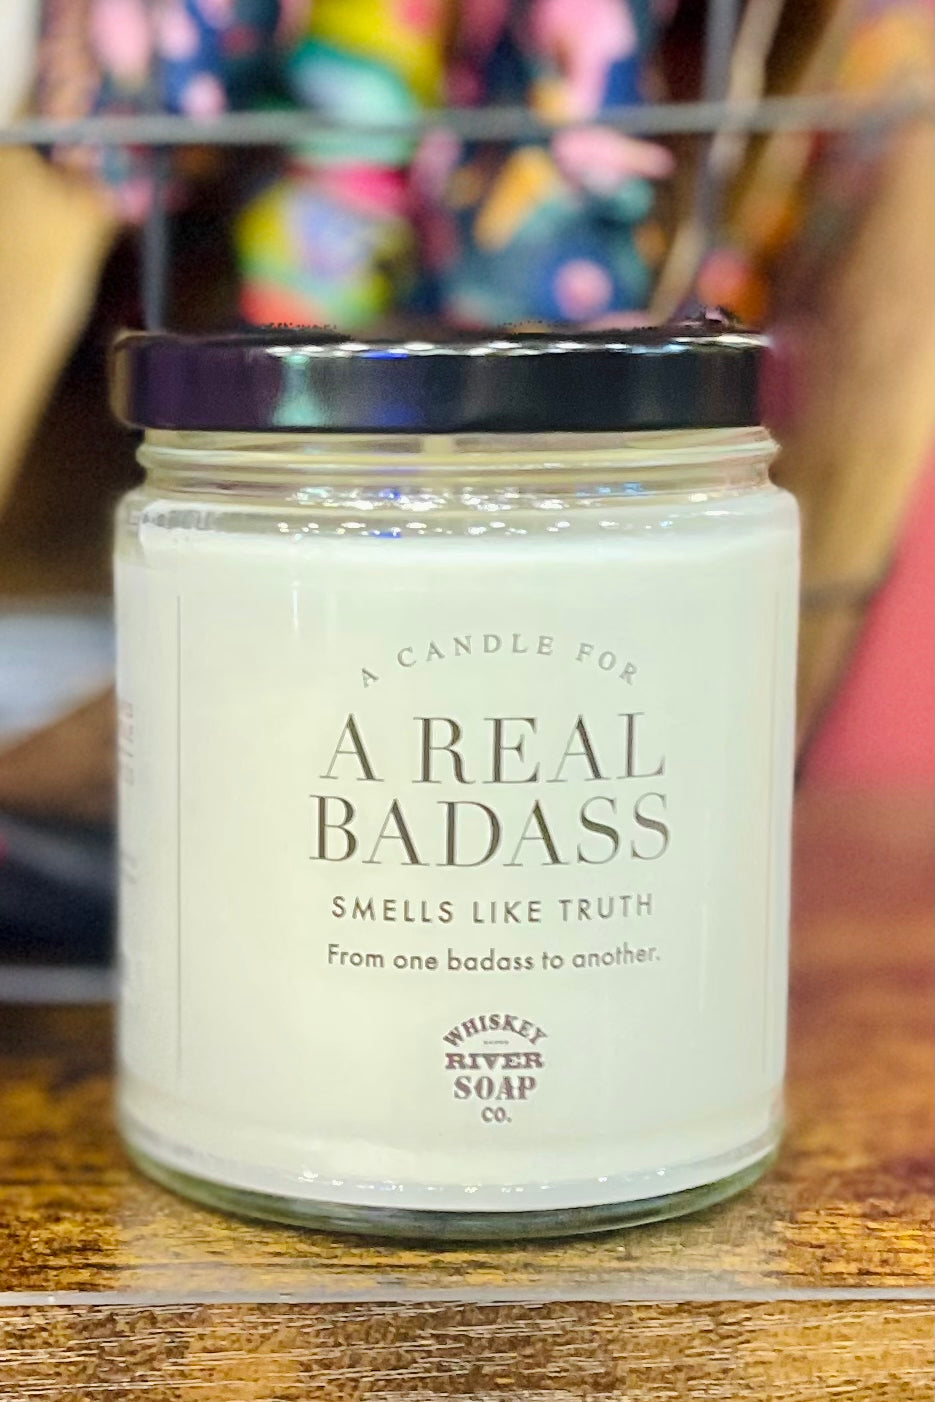 A Real Badass Candle